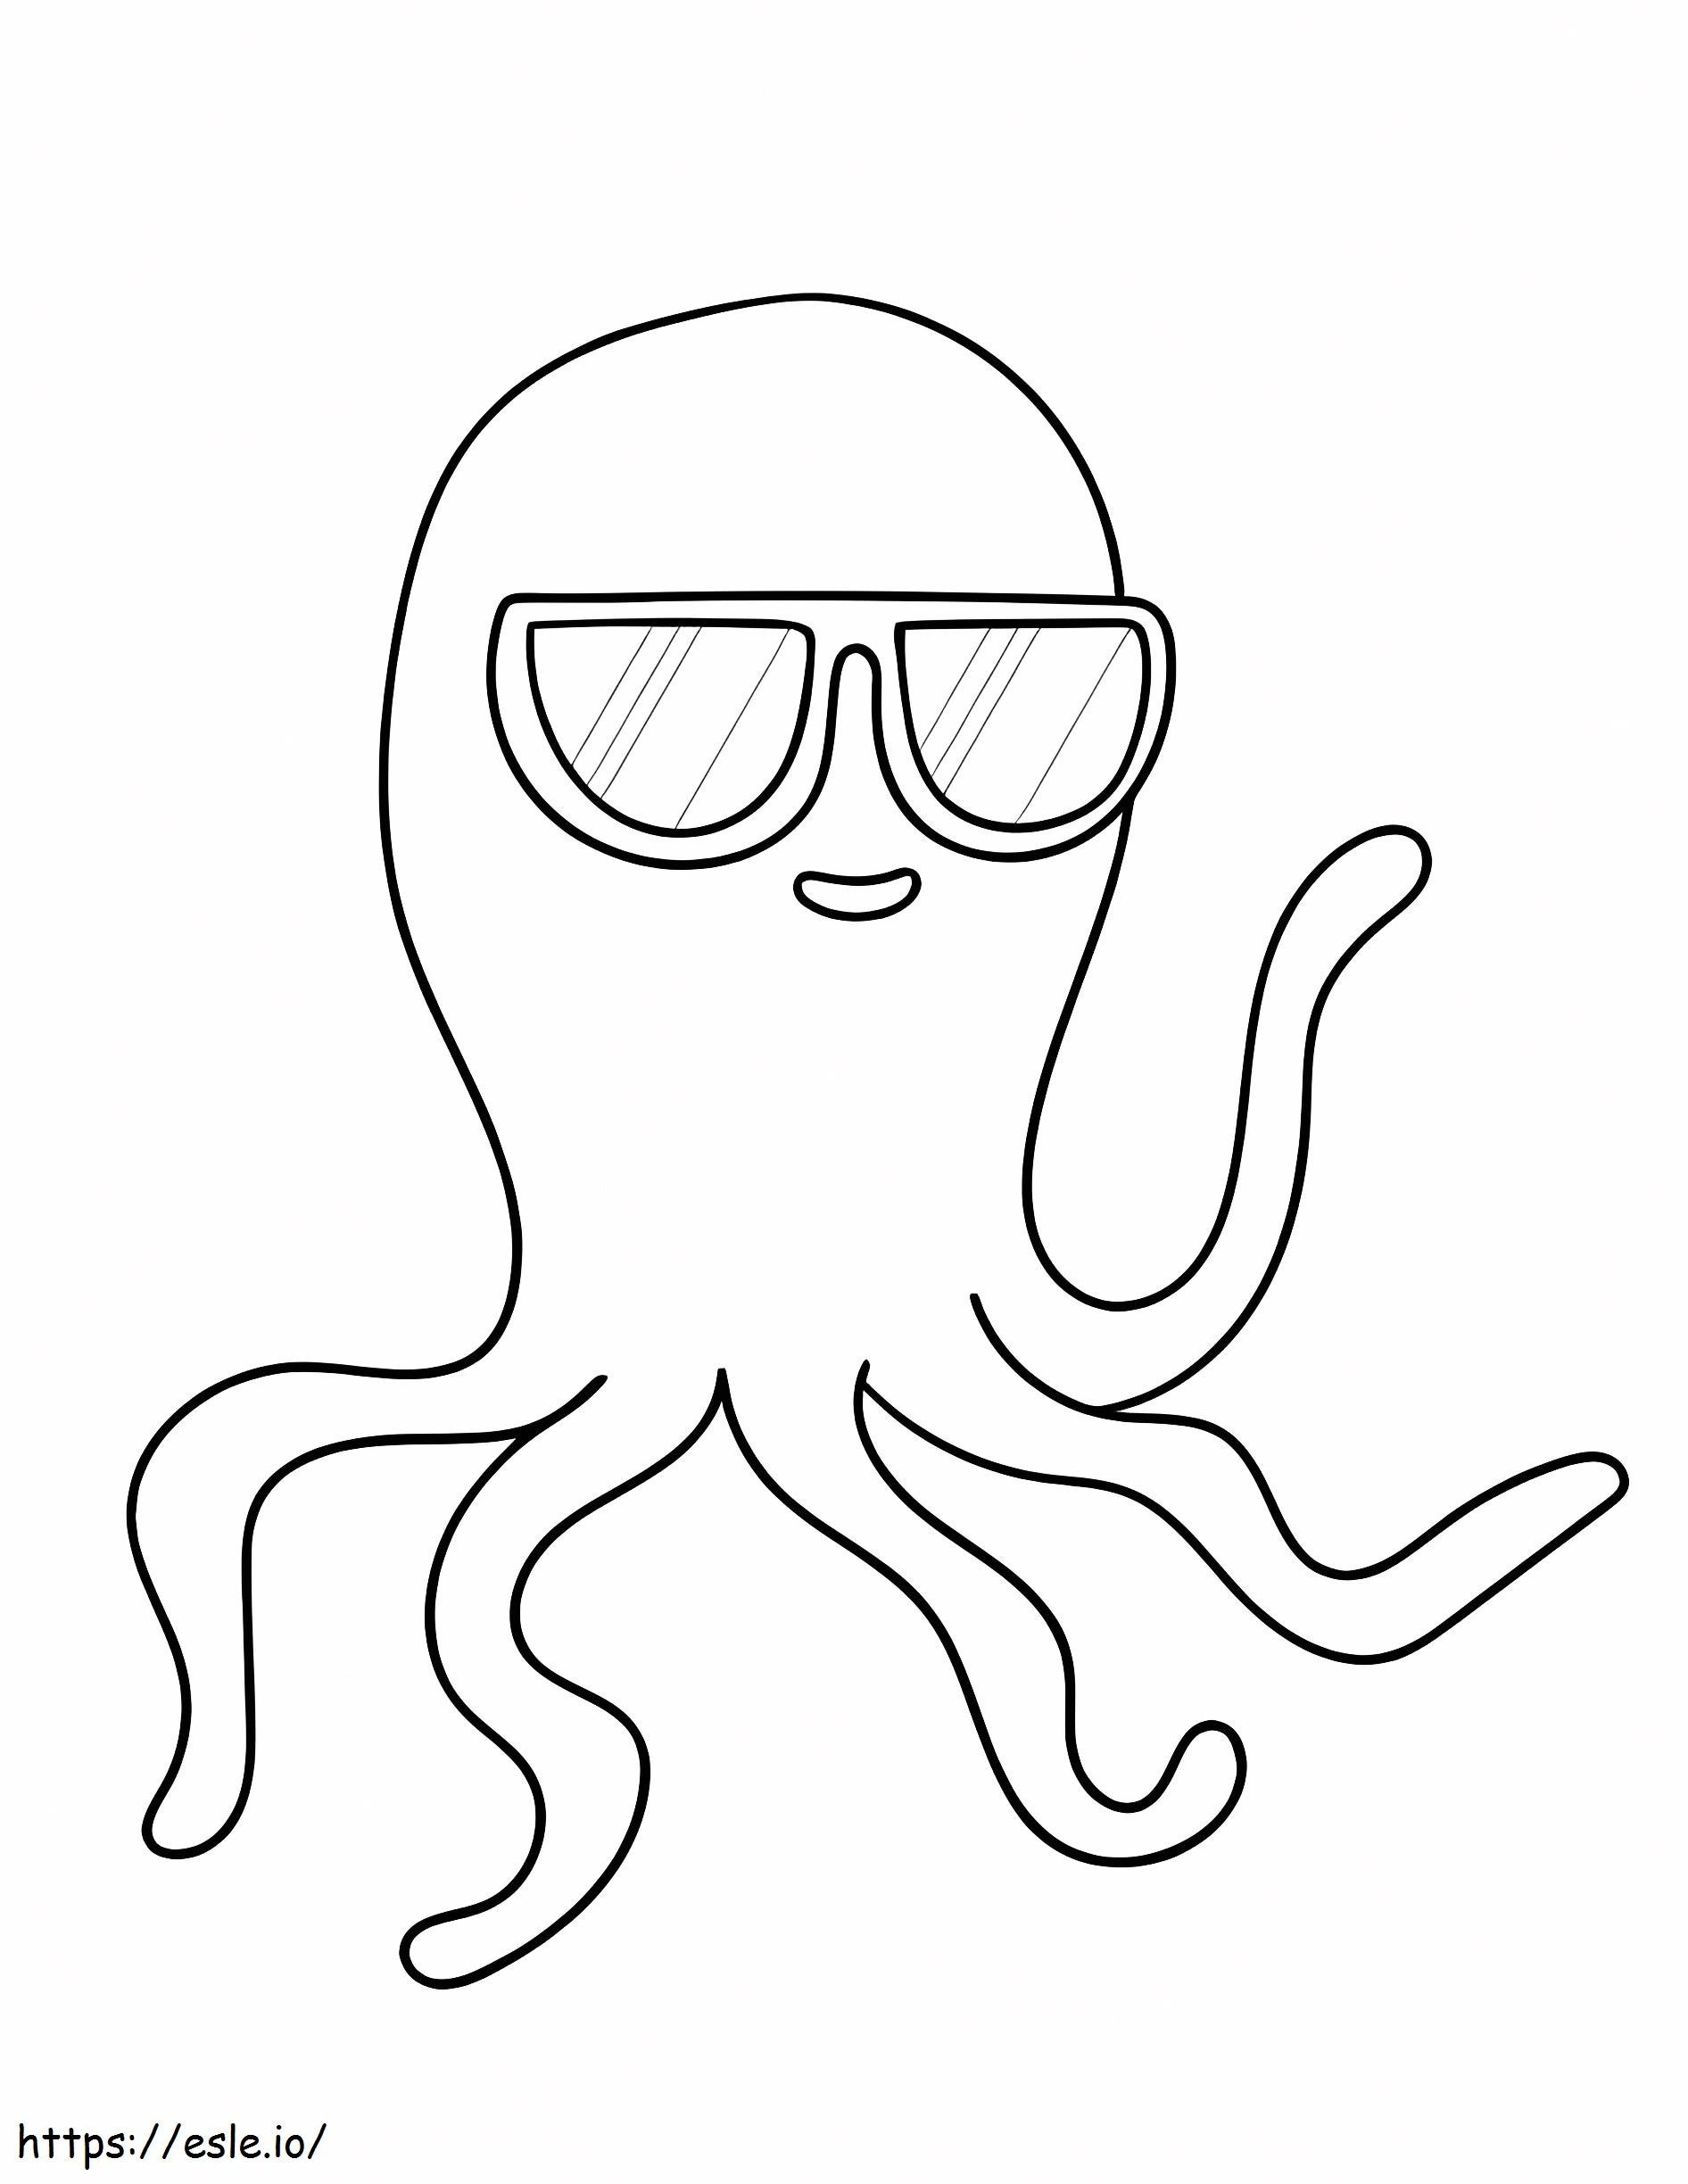 Legal Octopus coloring page